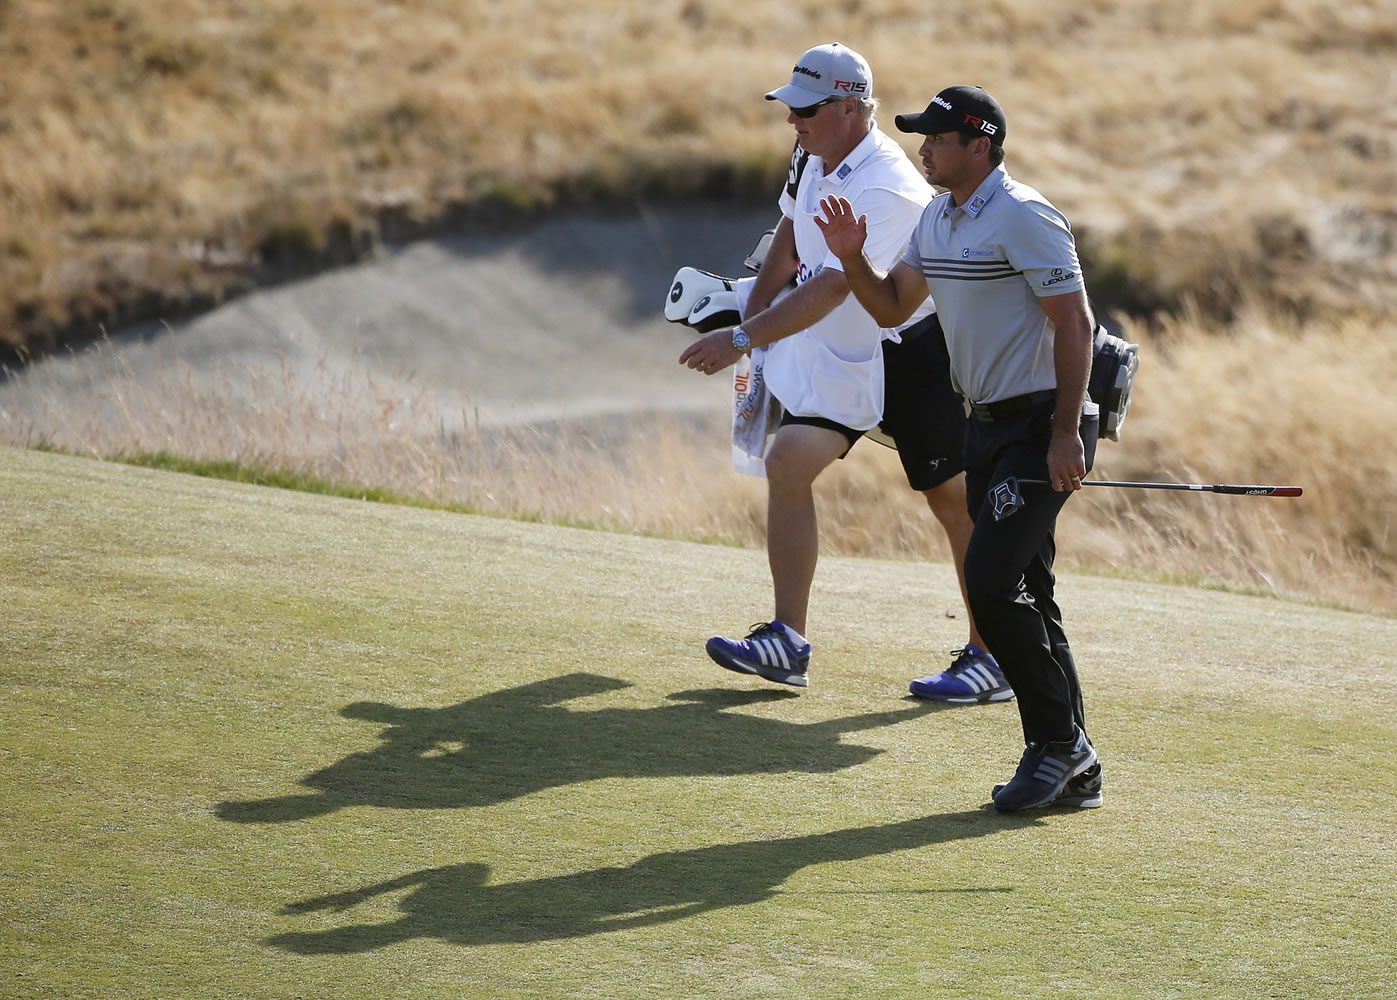 Jason Day walks up to the 18th green with his caddie Colin Swatton during third round of the U.S. Open at Chambers Bay on Saturda in University Place. Day is tied for the lead at 4-under par despite suffering from vertigo during the past two rounds.